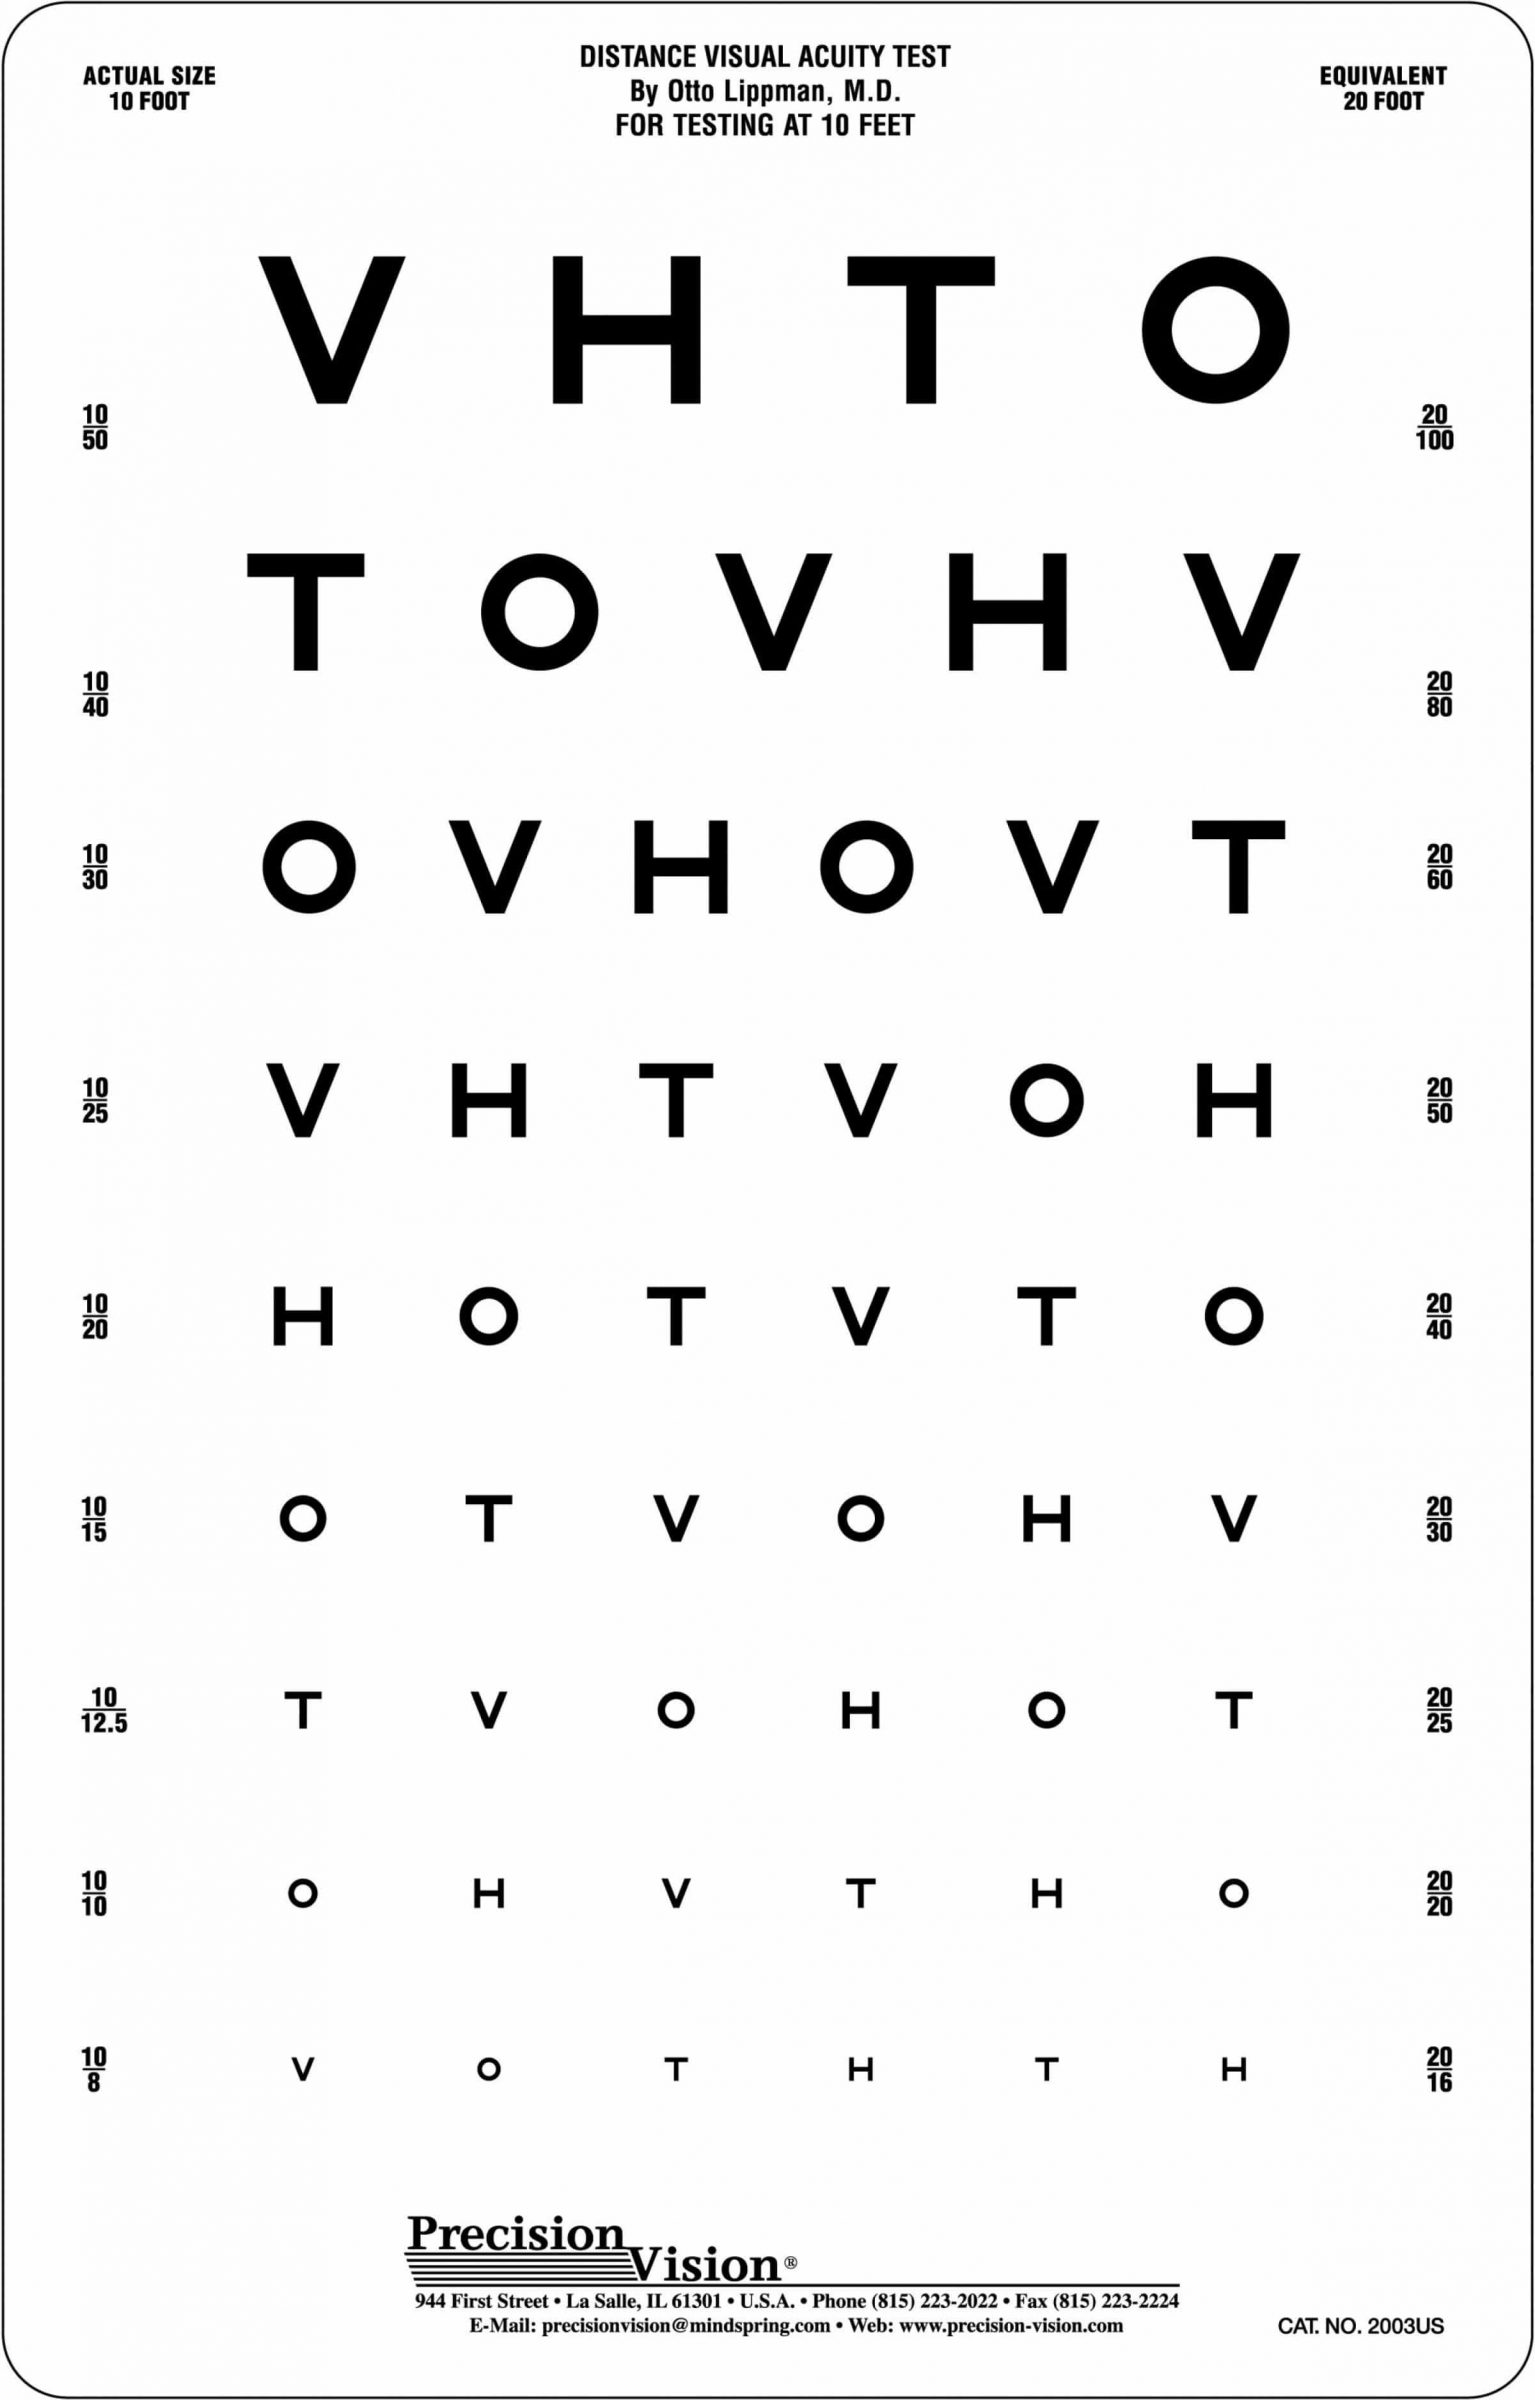 Snellen Chart for testing visual acuity.